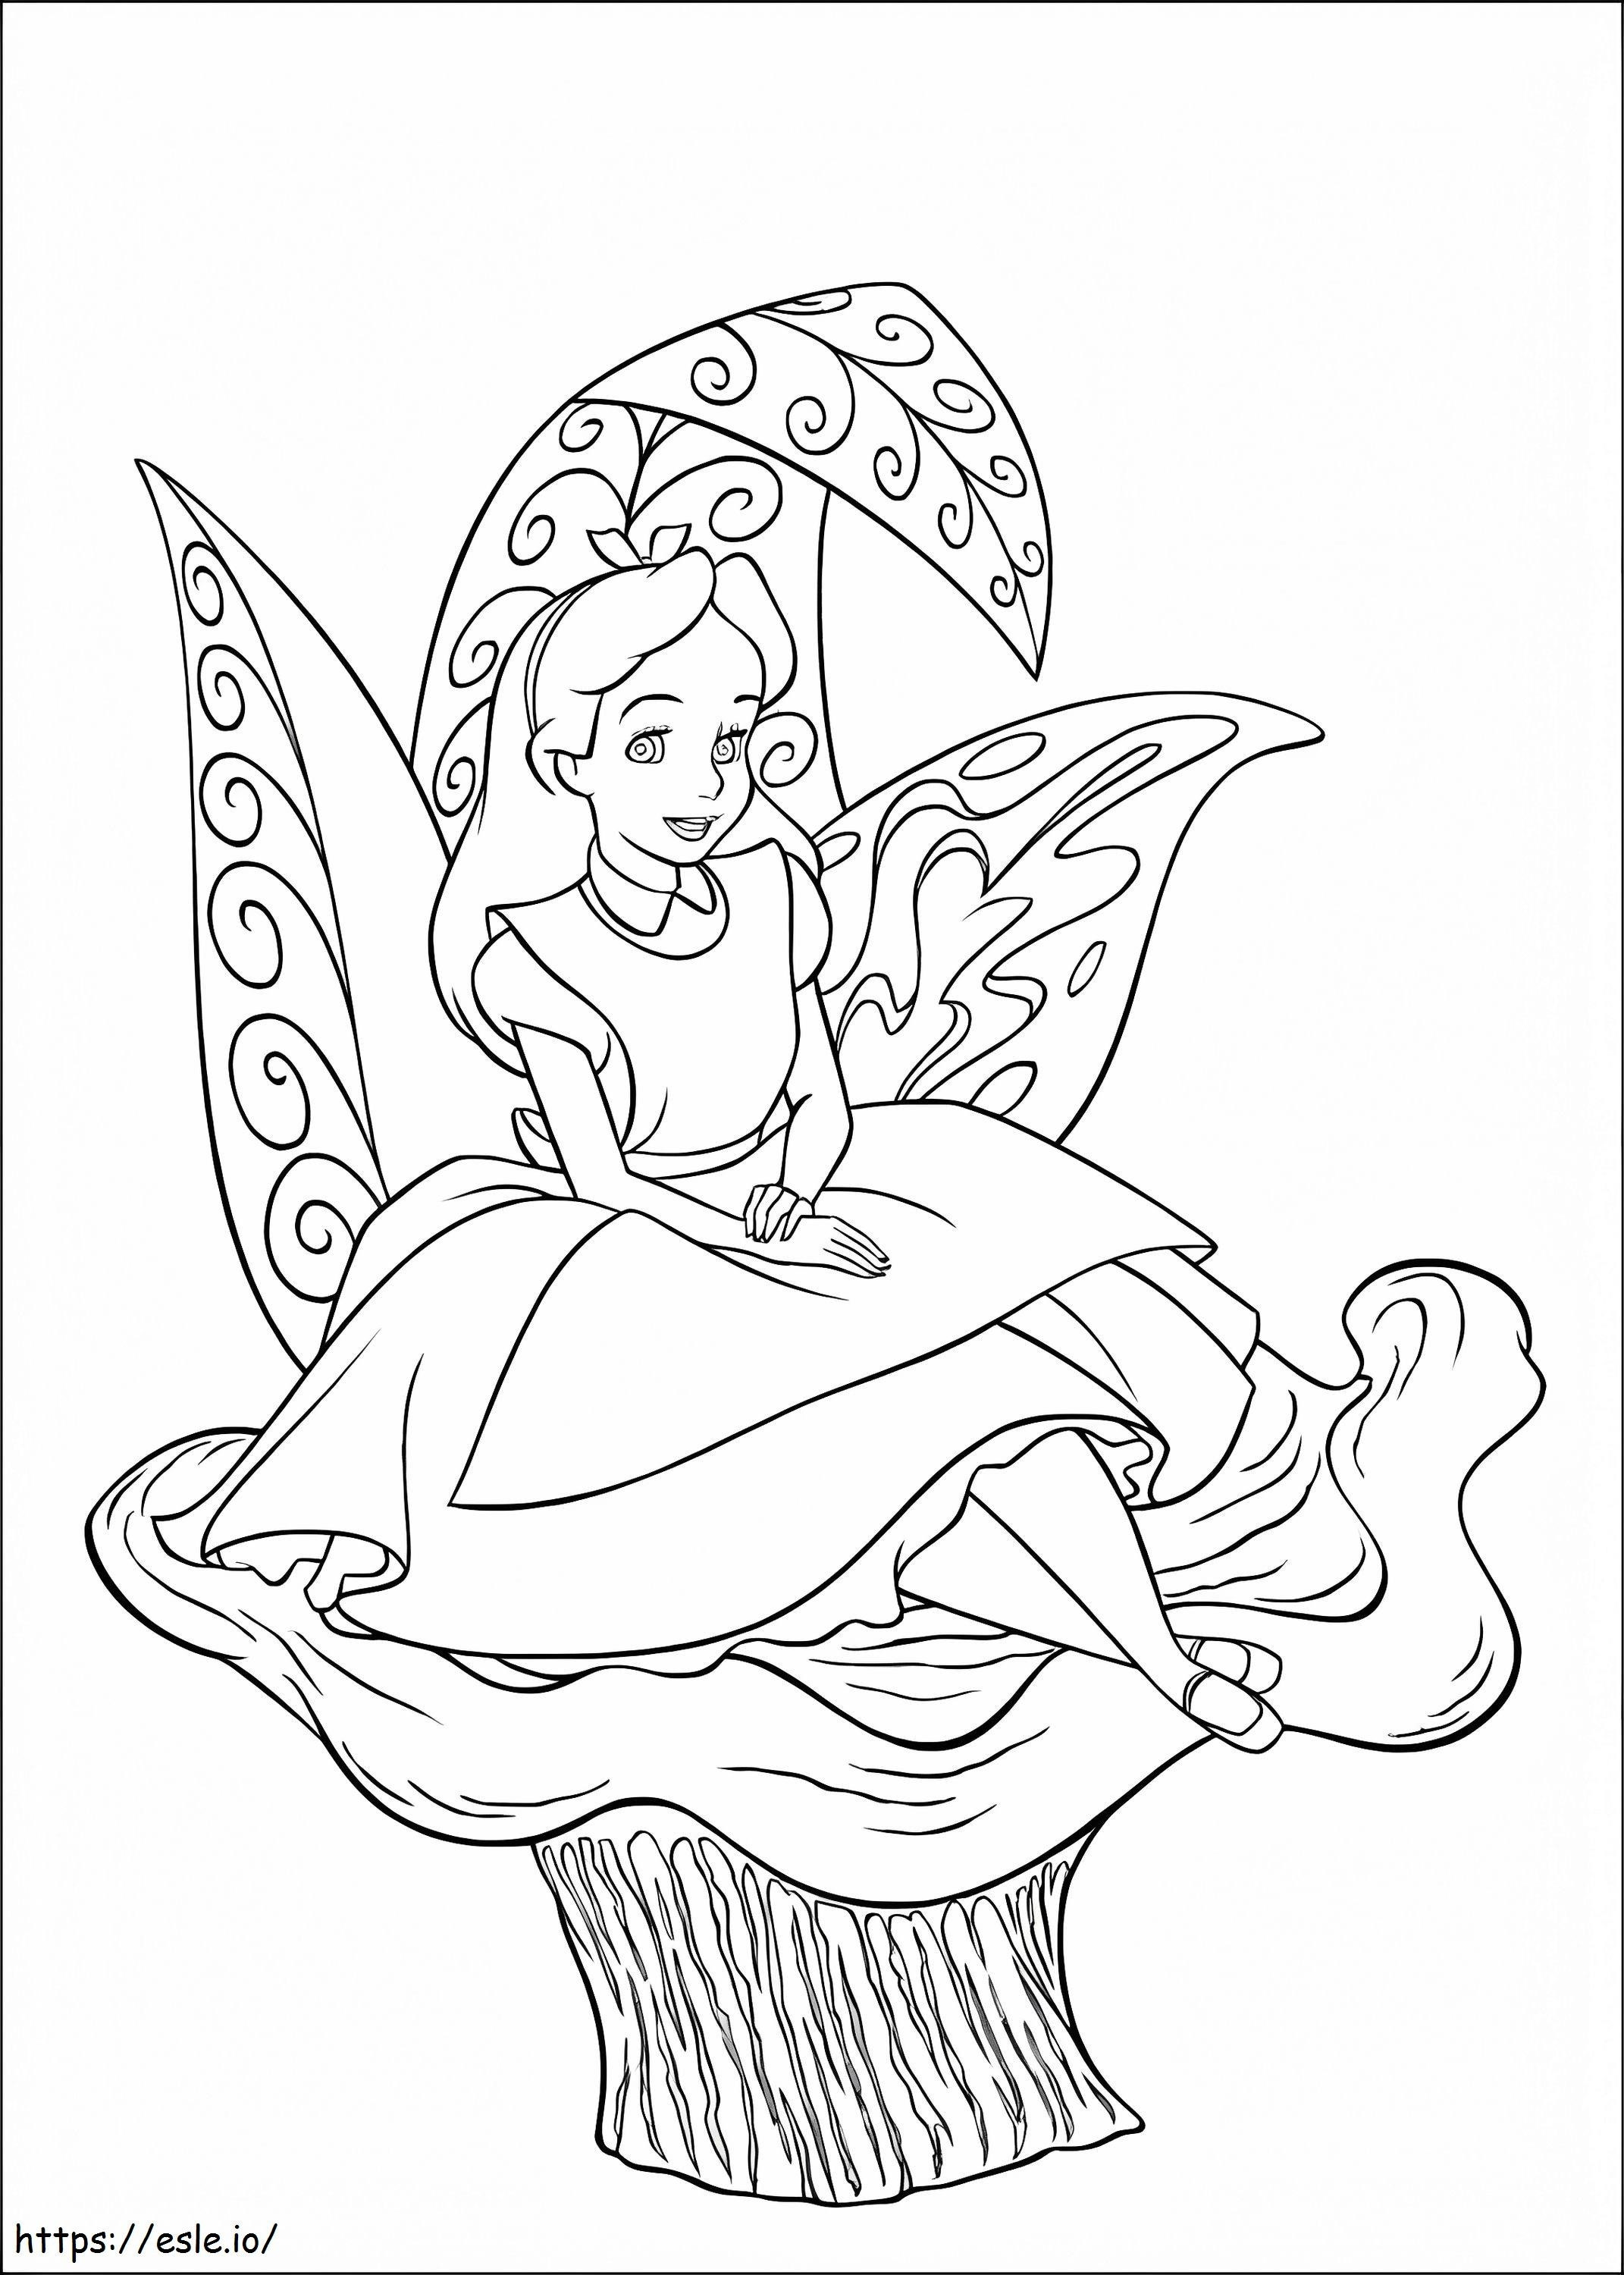 Cute Alice From Alice In Wonderland coloring page